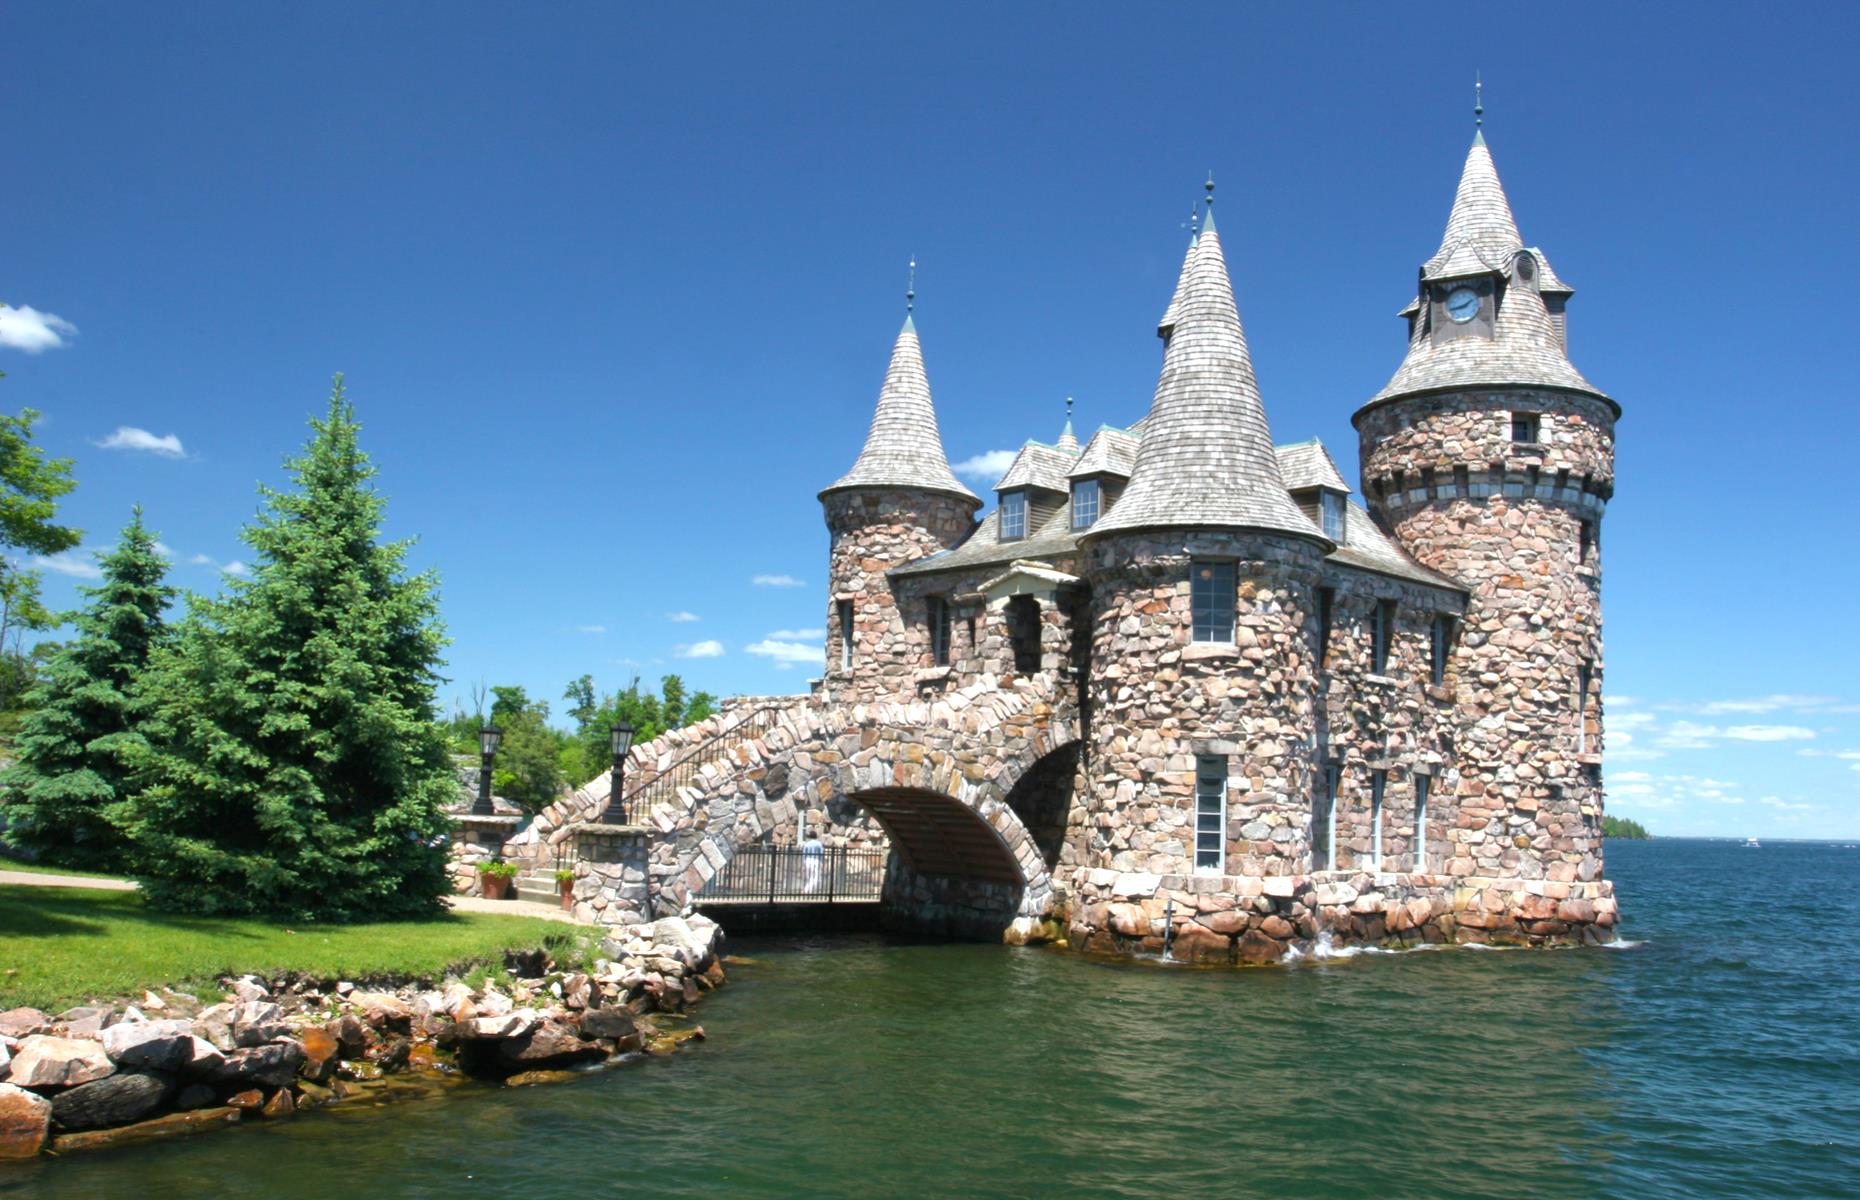 <p>The USA is not known for its fortresses, but this European-inspired castle in New York's Alexandria Bay delivers. It was built in the early 1900s for millionaire George C. Boldt and his beloved wife, who passed during its construction, leading Boldt to abandon his extravagant project. With its Italian-style gardens and whimsical turrets, it rivals the many castles on the Continent for sheer fairy-tale factor. The castle can be reached by boat, and is open daily until Labor Day weekend 2020. Discover other <a href="https://www.loveexploring.com/galleries/74548/15-spectacular-american-castles-you-never-knew-existed?page=1">fairy-tale castles you never knew existed in the USA</a>.</p>